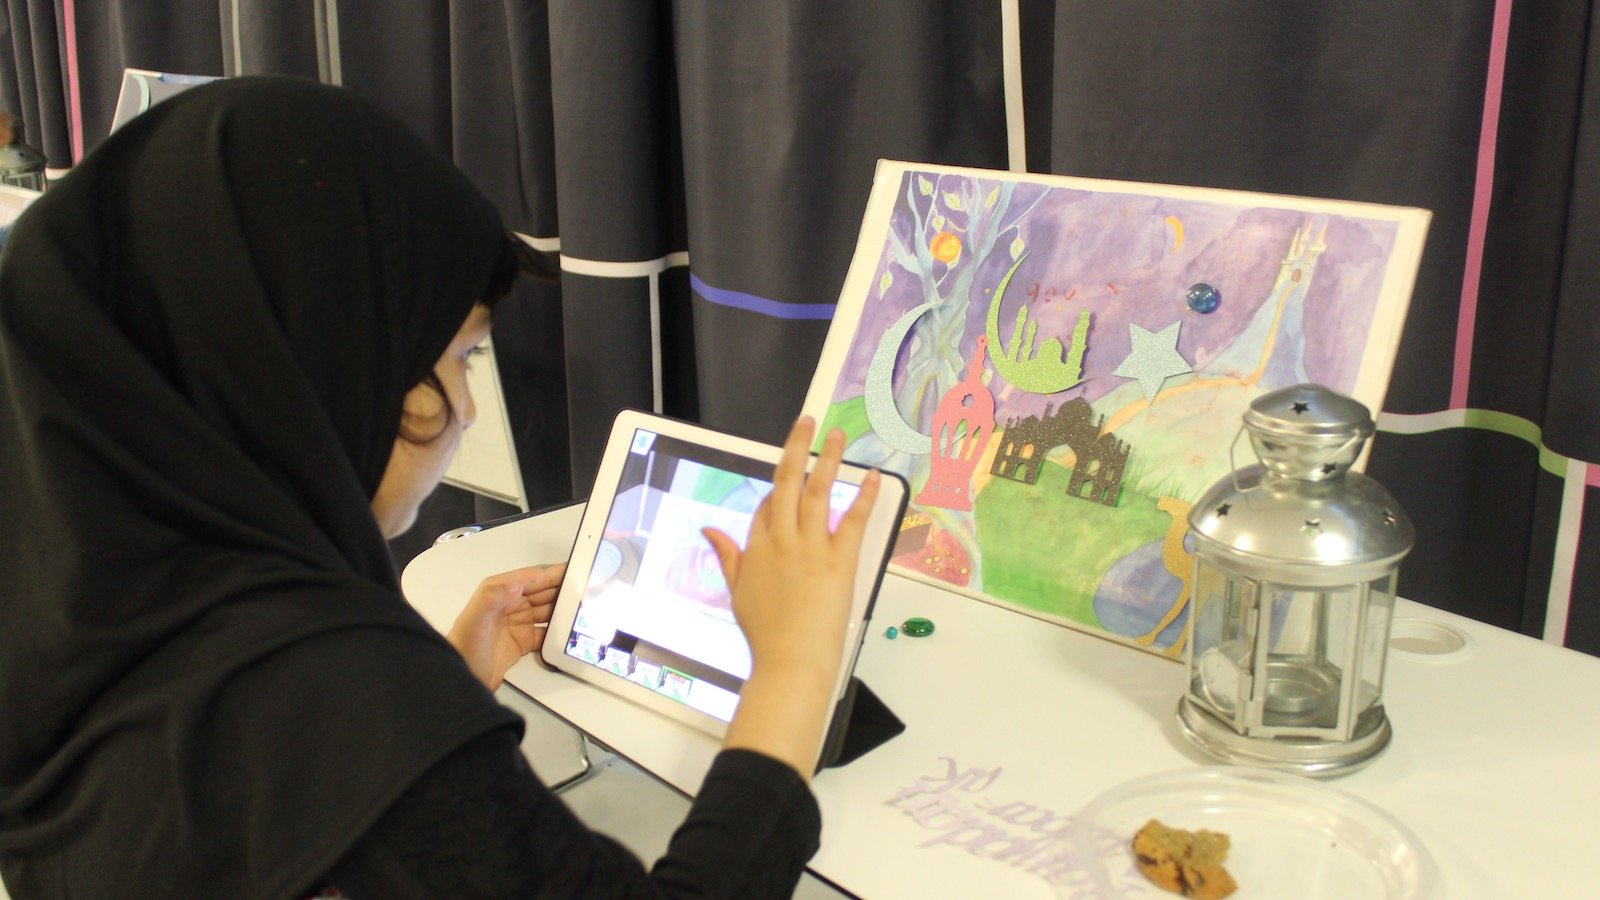 A young girl in a hijab touches the screen of an iPad making animations